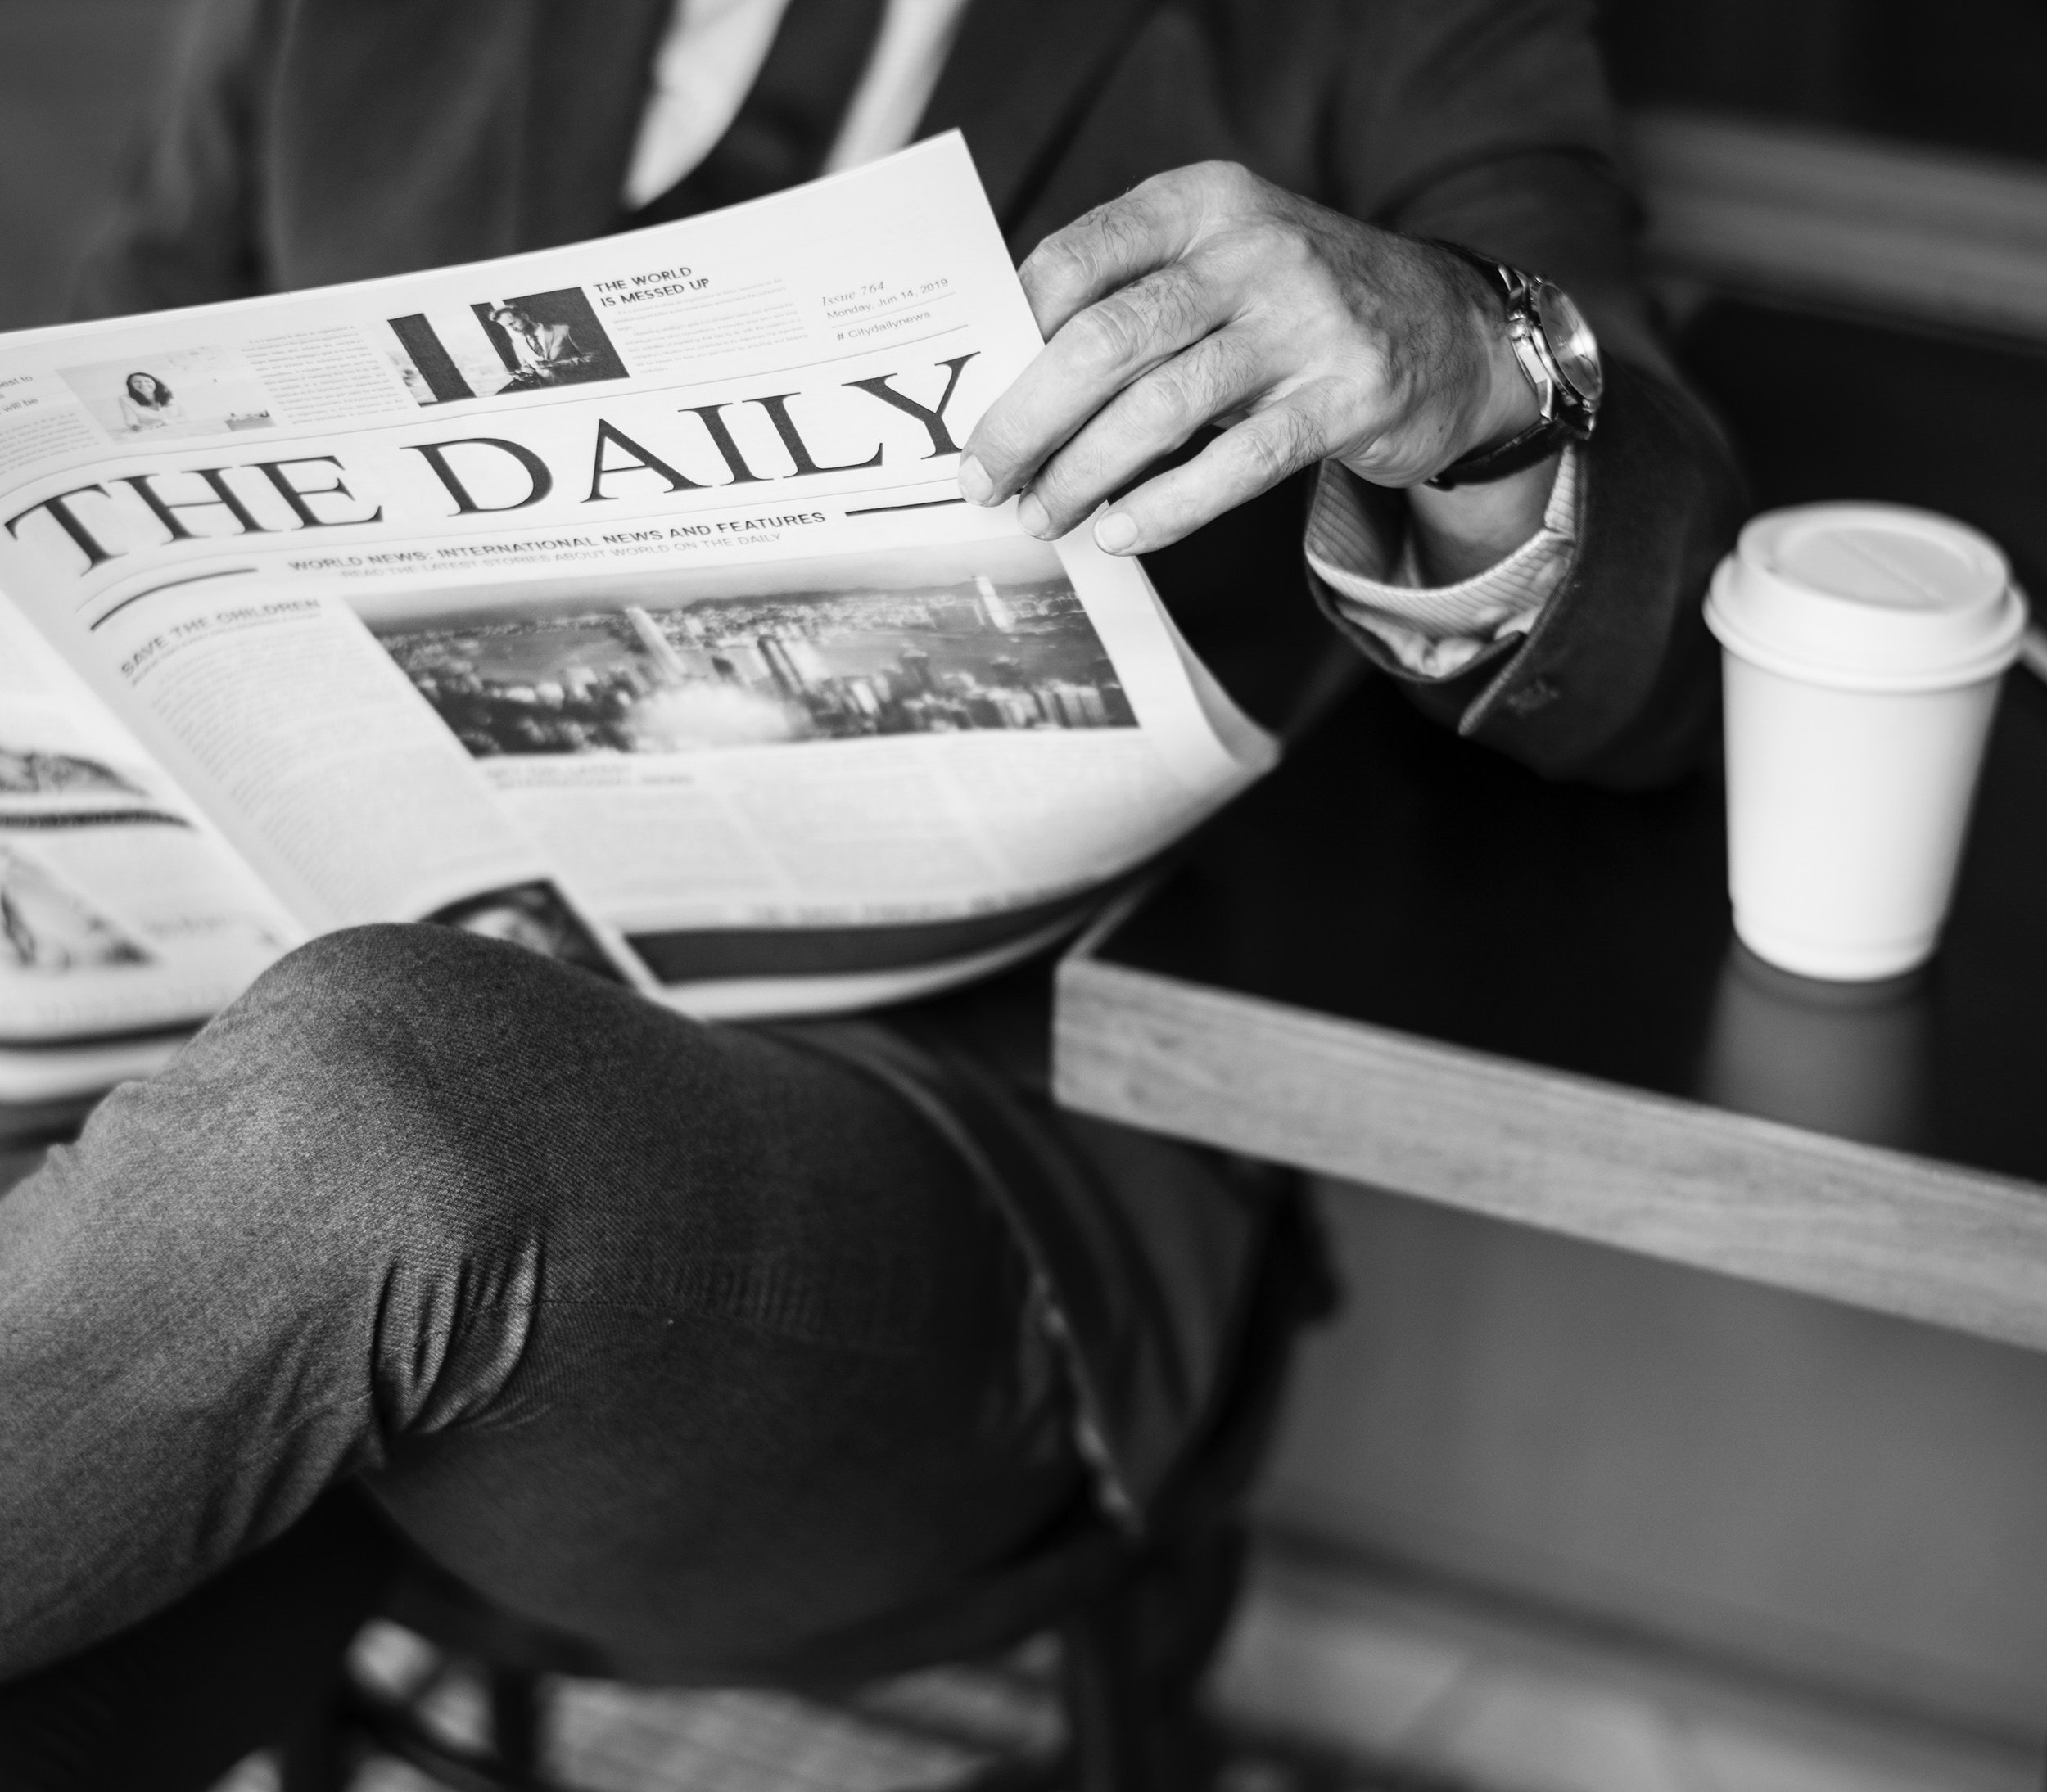 A man reads a newspaper on a bench with a takeaway coffee cup on a table beside him